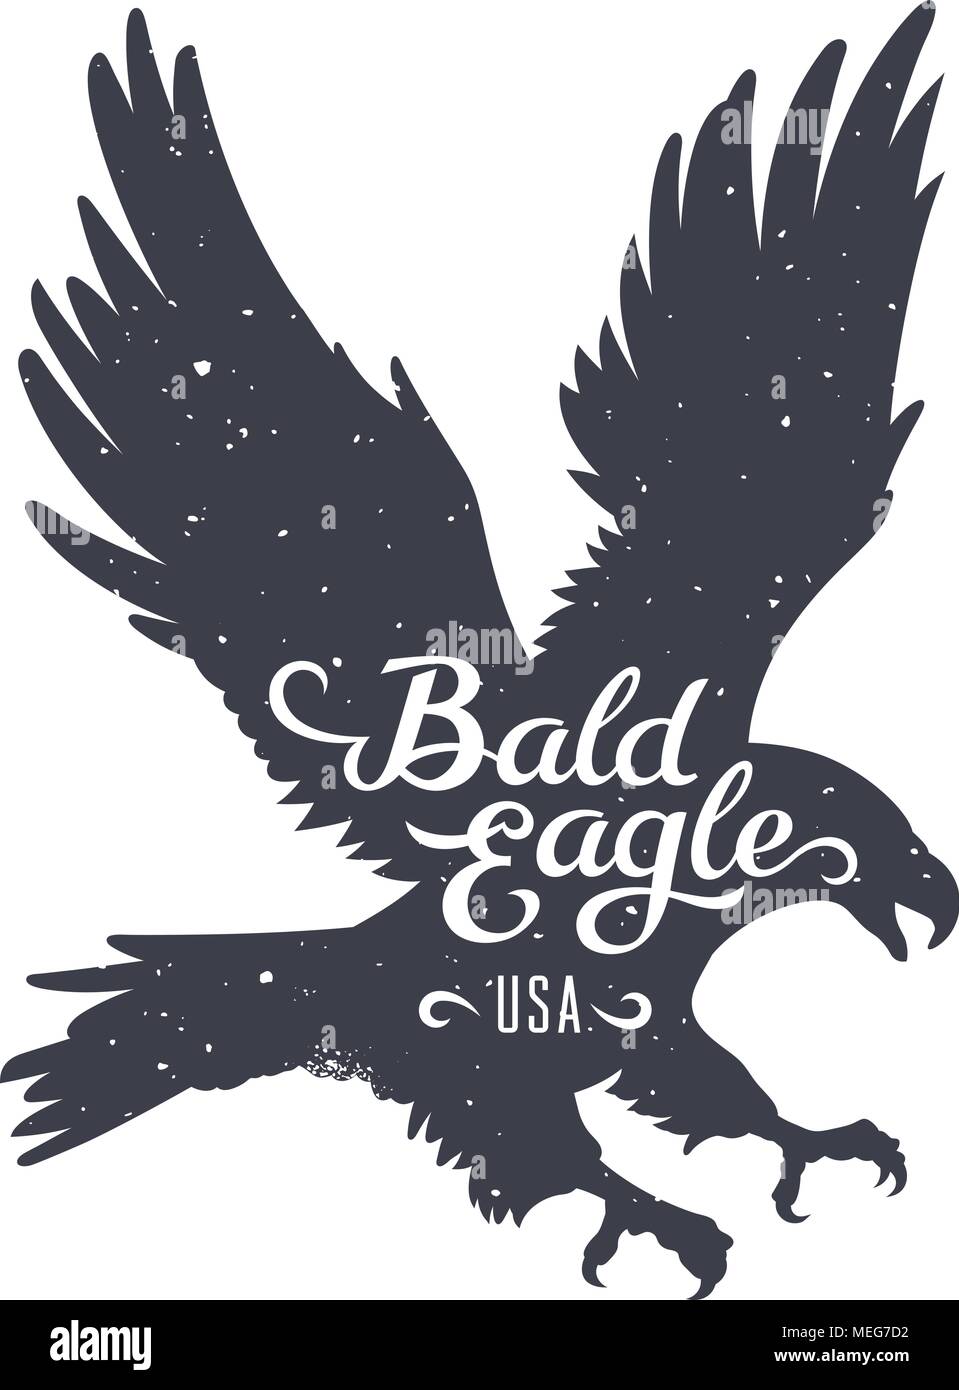 Grunge textured Bald Eagle silhouette and handwritten inscription 'Bald Eagle USA' / Vector illustration in hipster style / T-shirt graphics Stock Vector